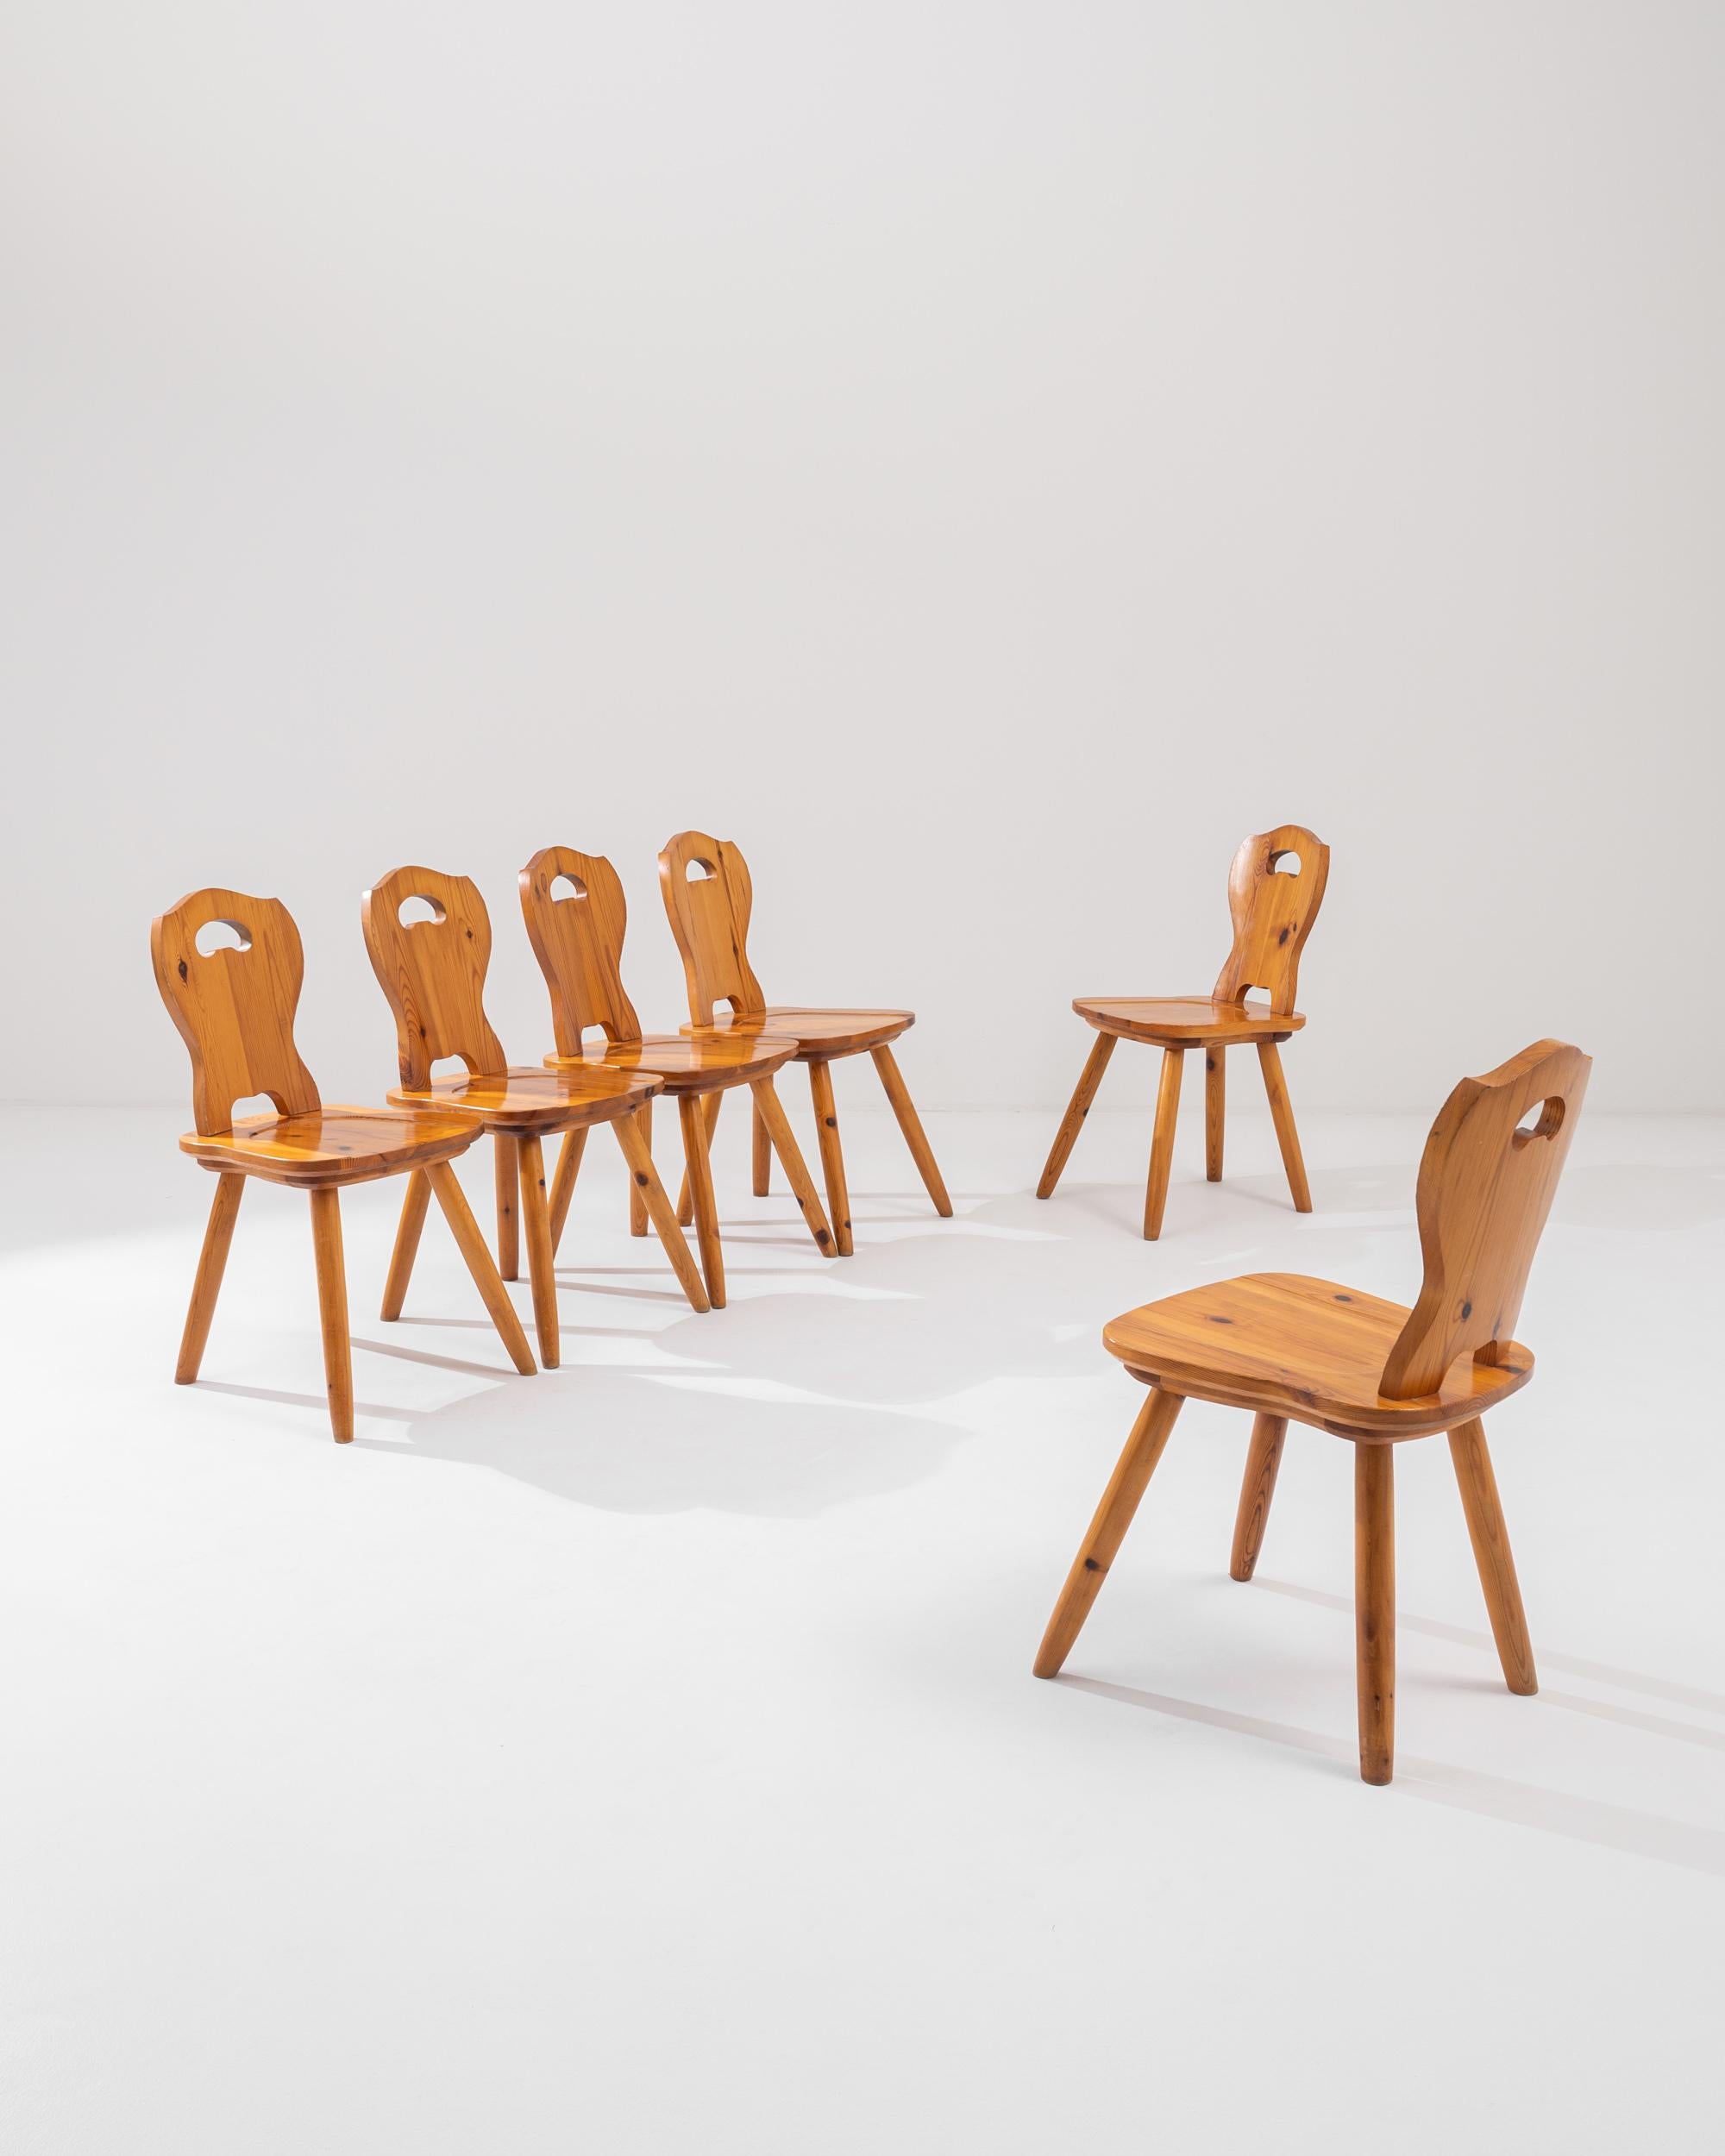 A set of six 20th century wooden dining chairs produced in France, these lustrous chairs impart a sophisticated simplicity. Standing on splayed tapered legs, the modern Silhouette lays special focus on the richness of the wood, highlighting its